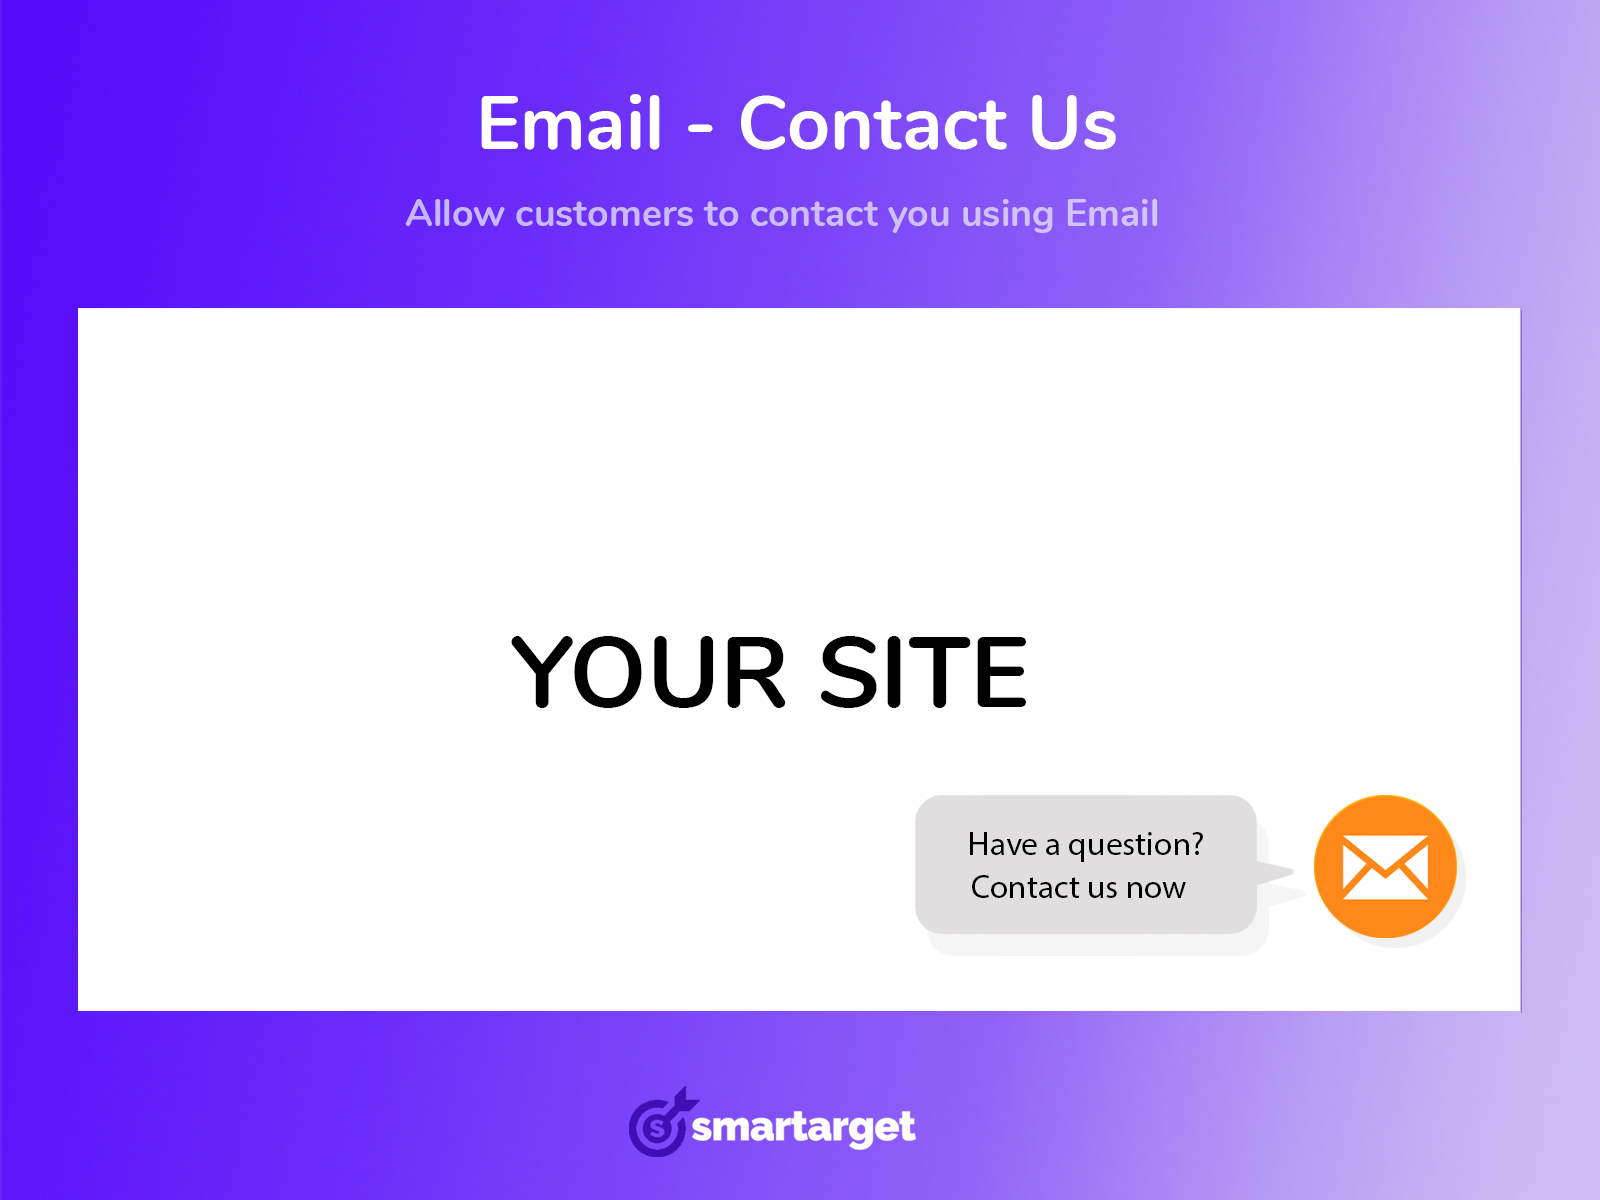 Smartarget Email - Contact Us Image